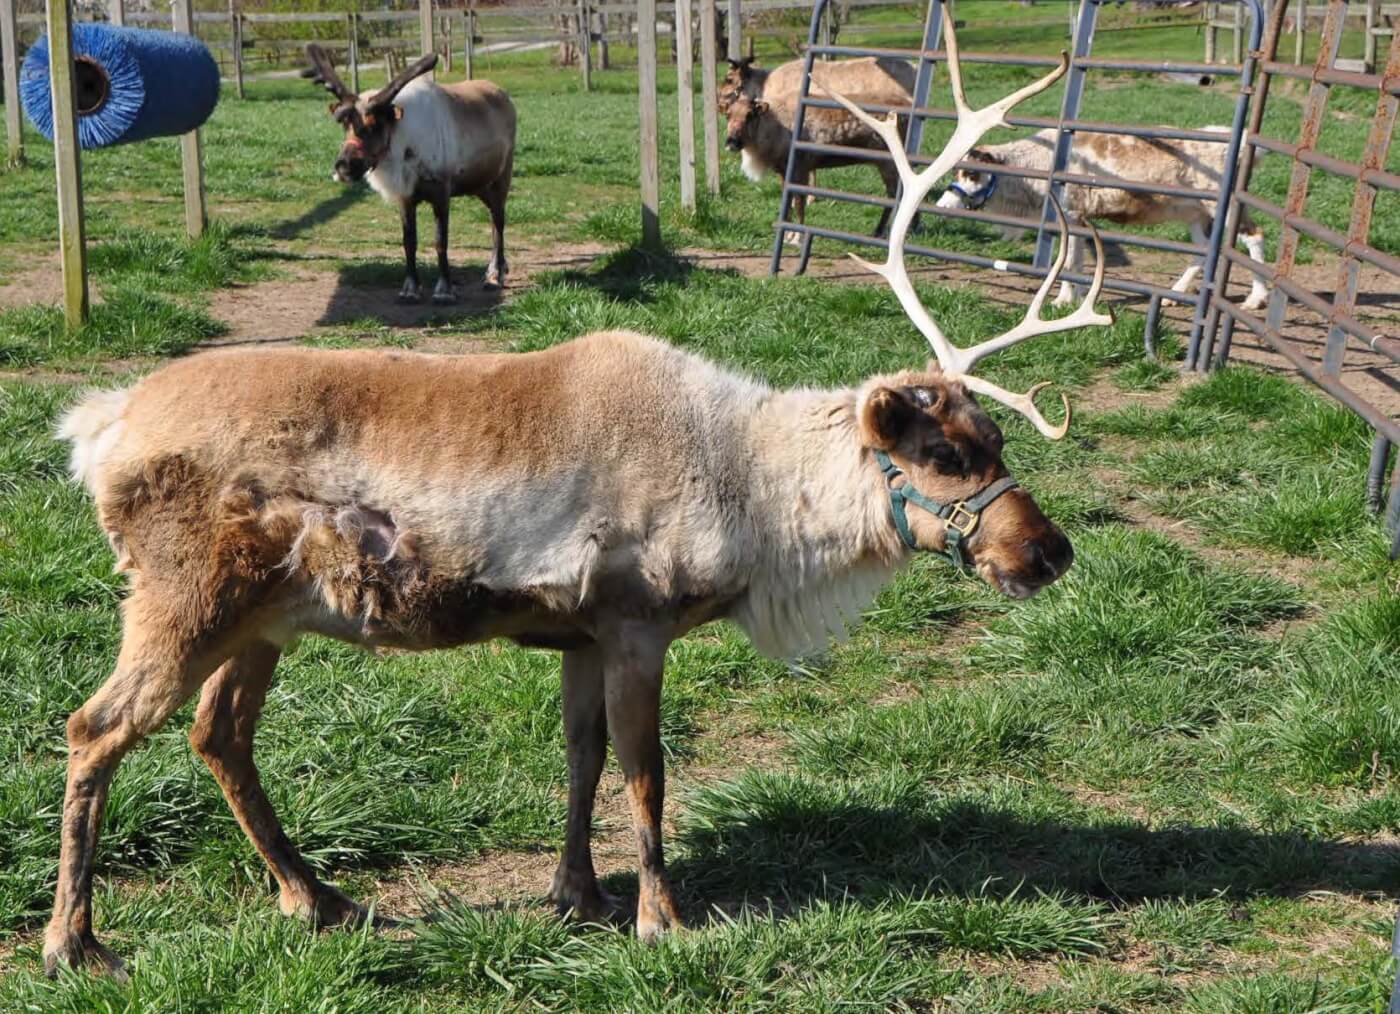 A reindeer with a bald patch, who may have been used for Christmas events